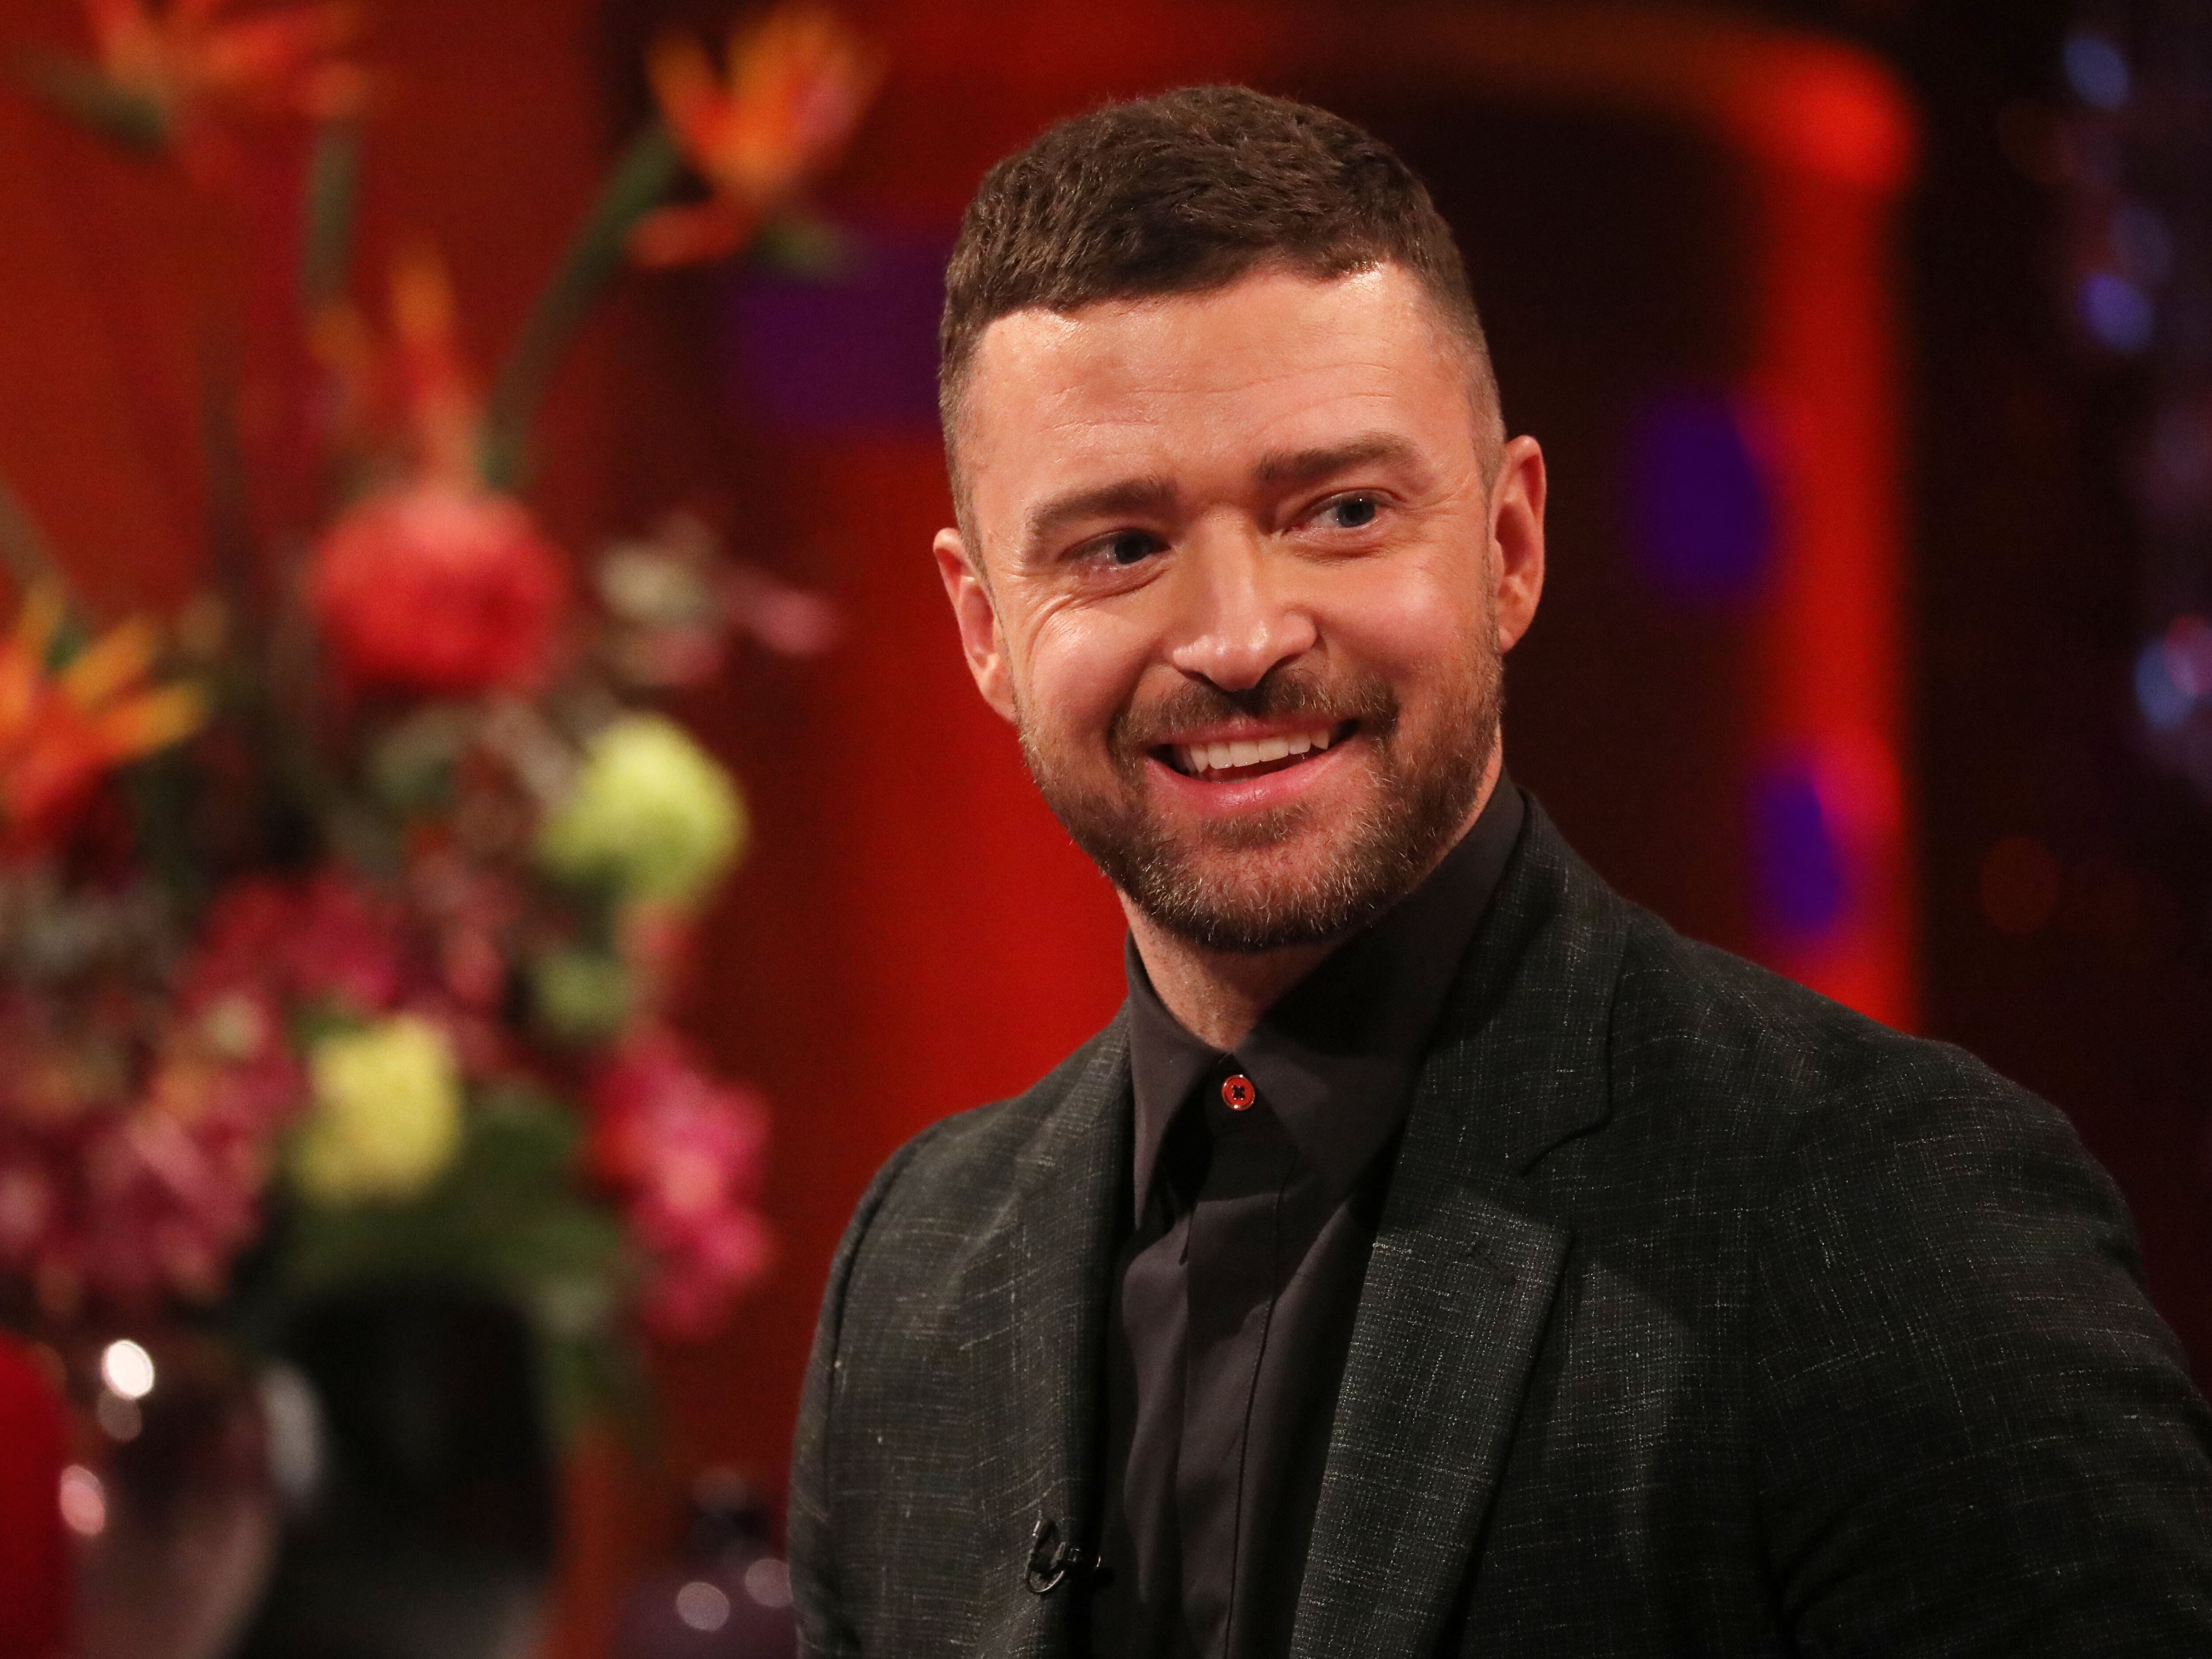 Justin Timberlake’s lawyer vows to ‘vigorously defend’ drink-driving allegations